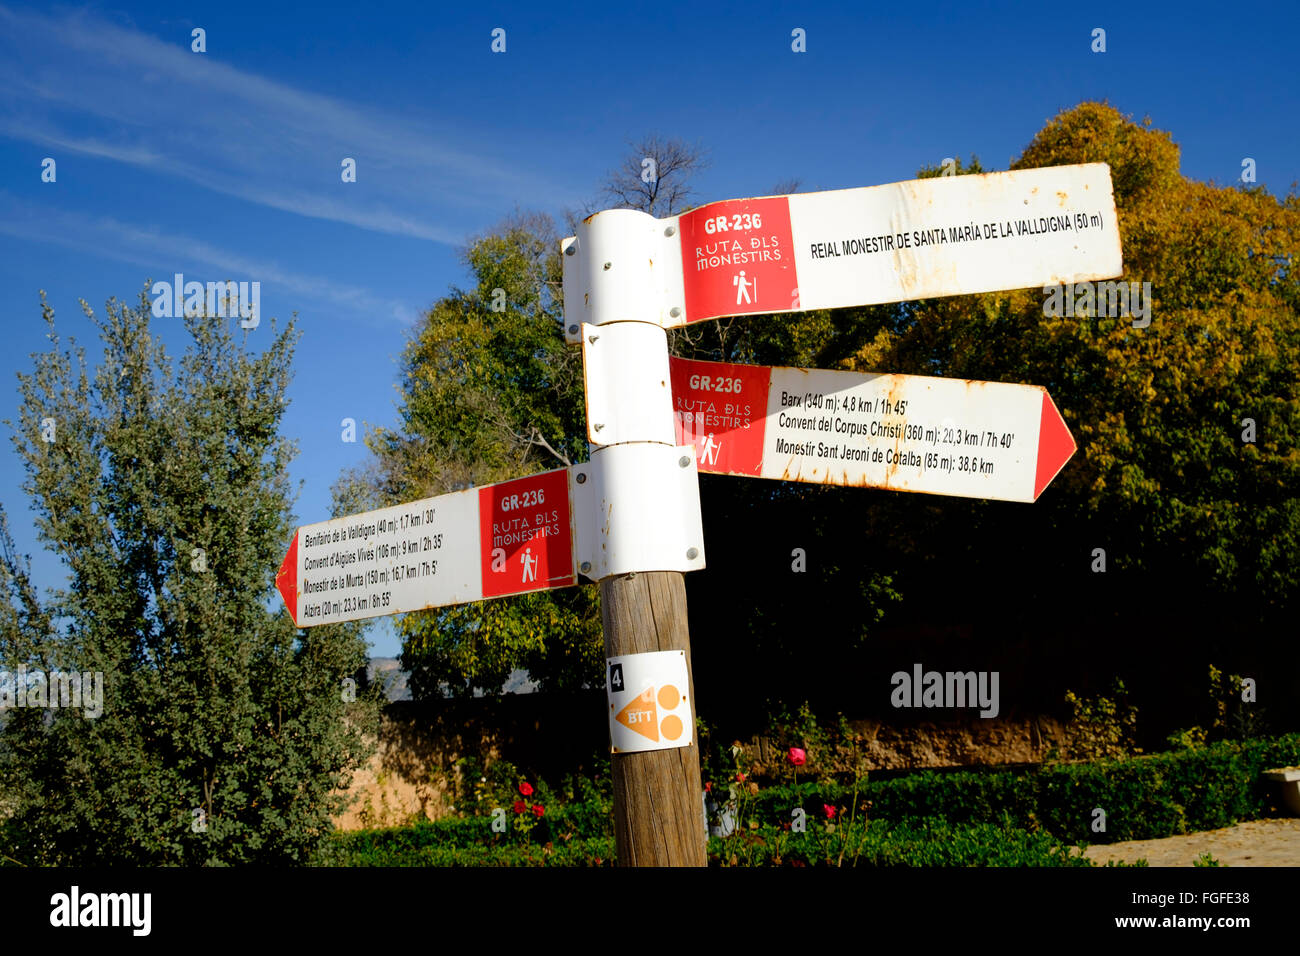 Signpost of the 'Ruta dls Monestirs' in the Valldigna Vally at Simat Spain Stock Photo